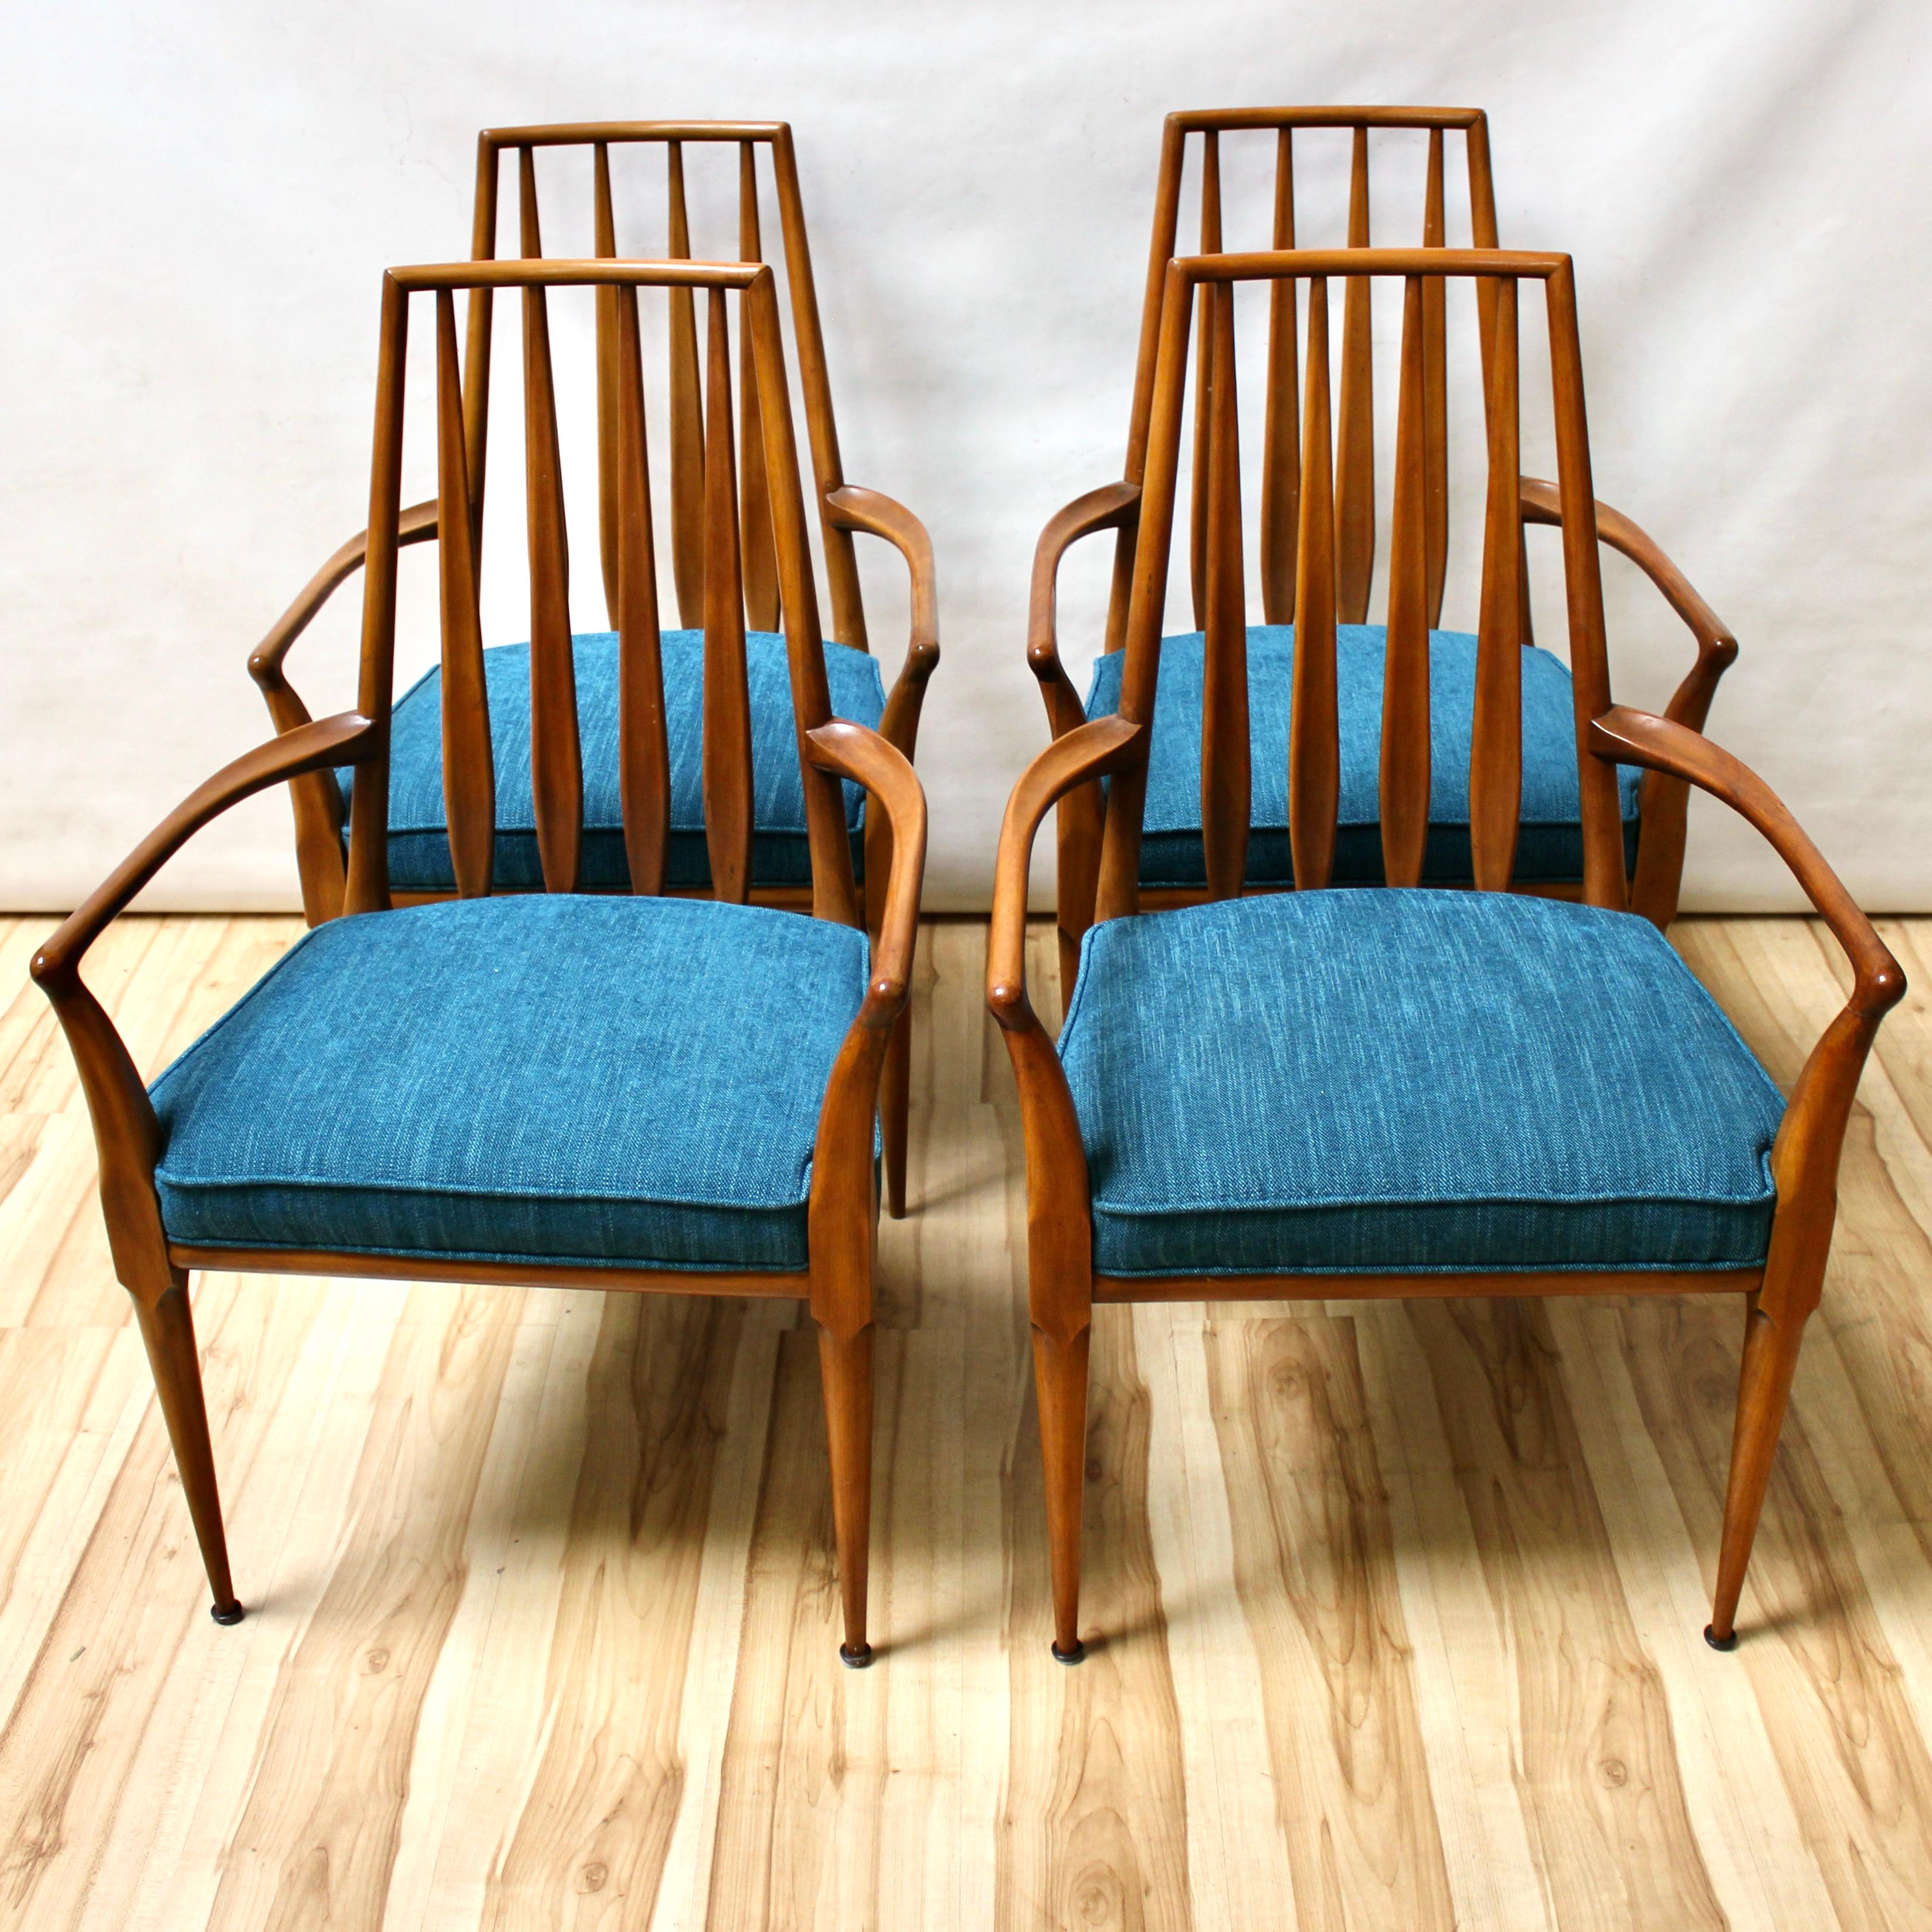 Set of four Mid-Century Modern dining chairs by Bert England. Similar in design to Scandinavian chairs of the period, they have been professionally reupholstered with new fabric and material. The chairs are all armchairs, and have blue upholstered